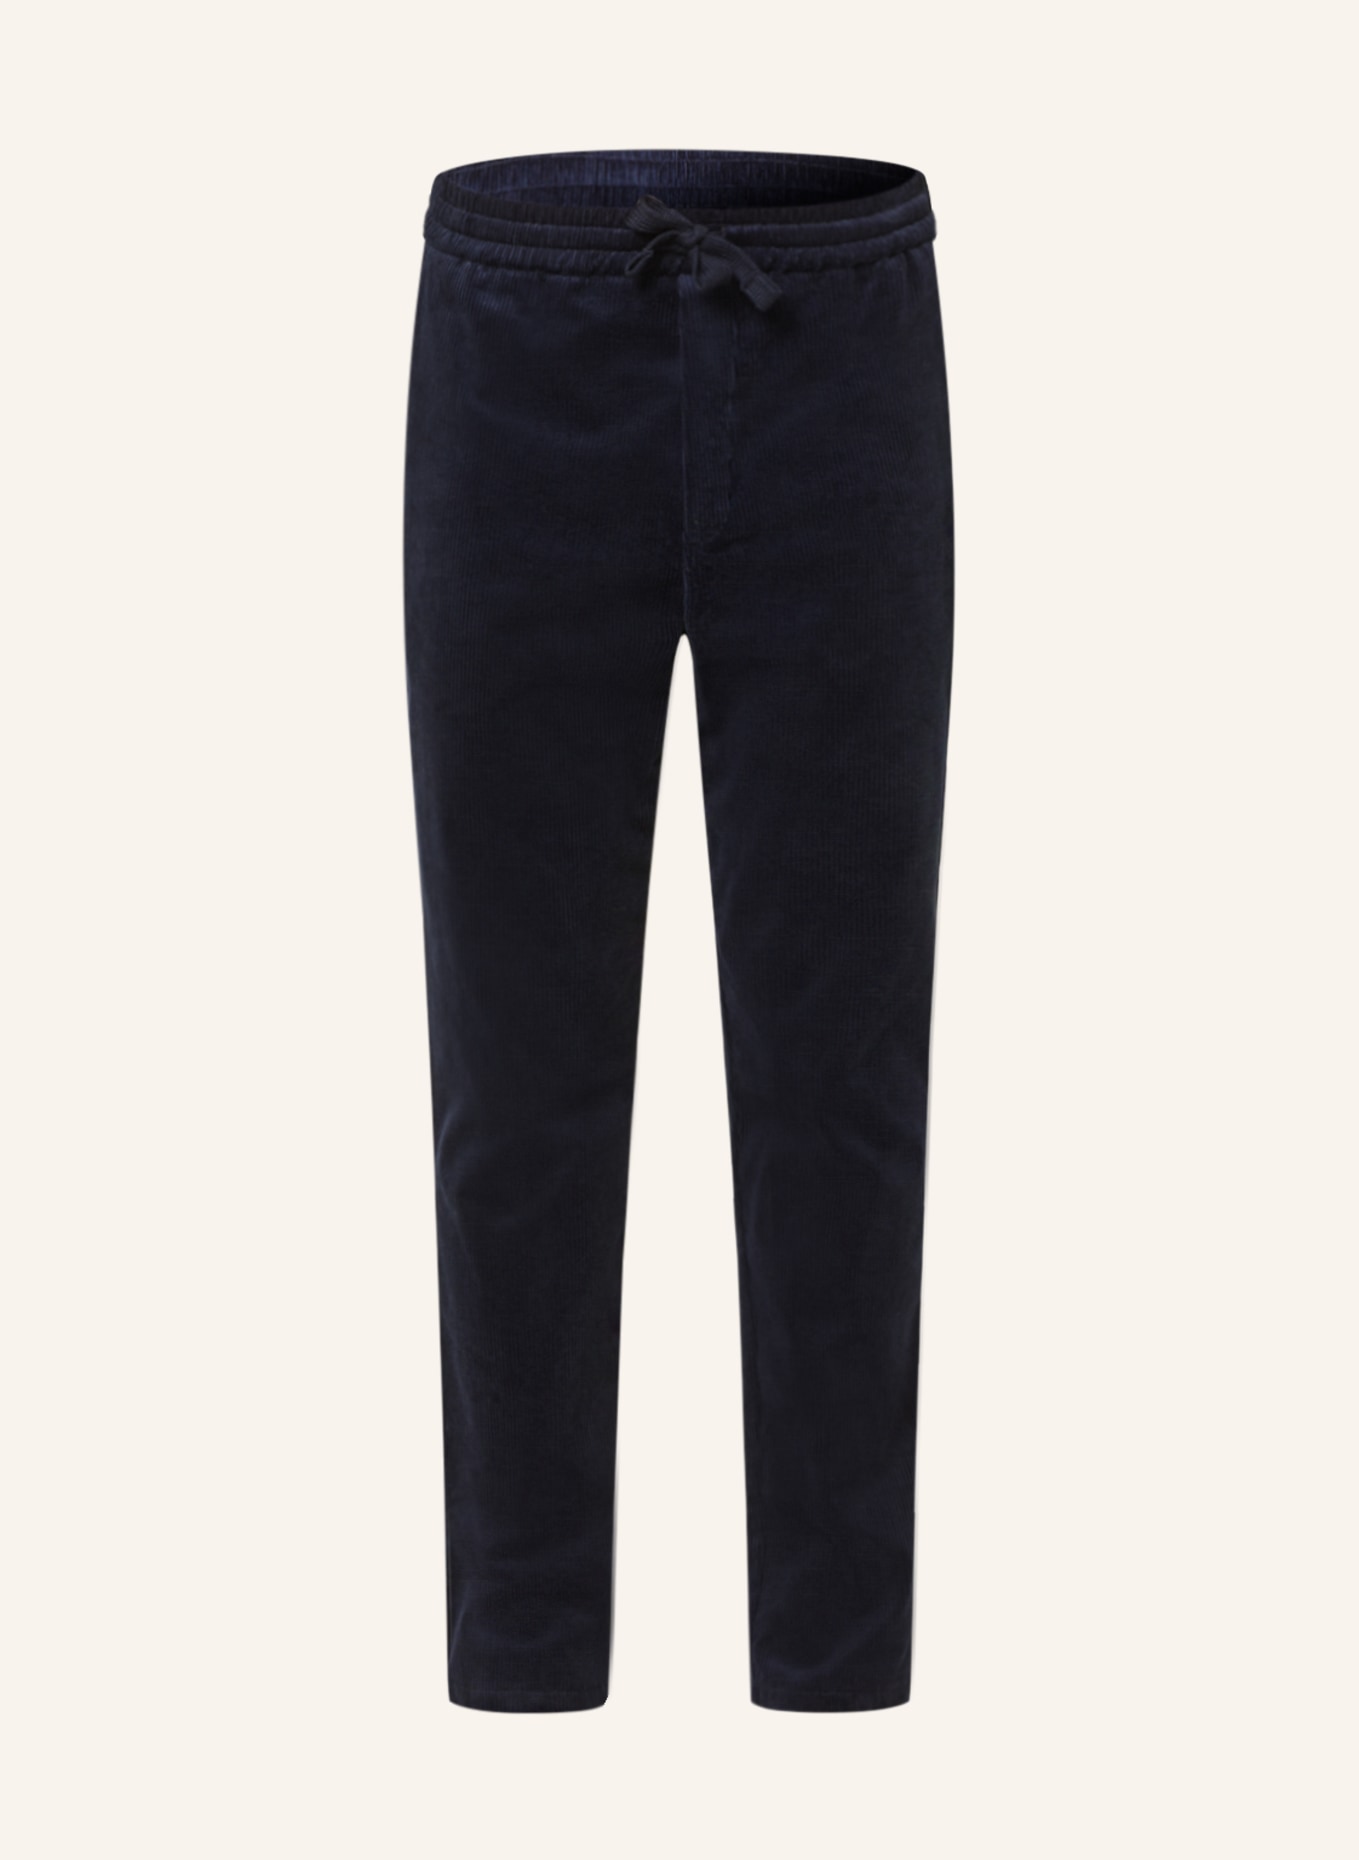 MAERZ MUENCHEN Corduroy trousers in jogger style regular fit, Color: DARK BLUE (Image 1)